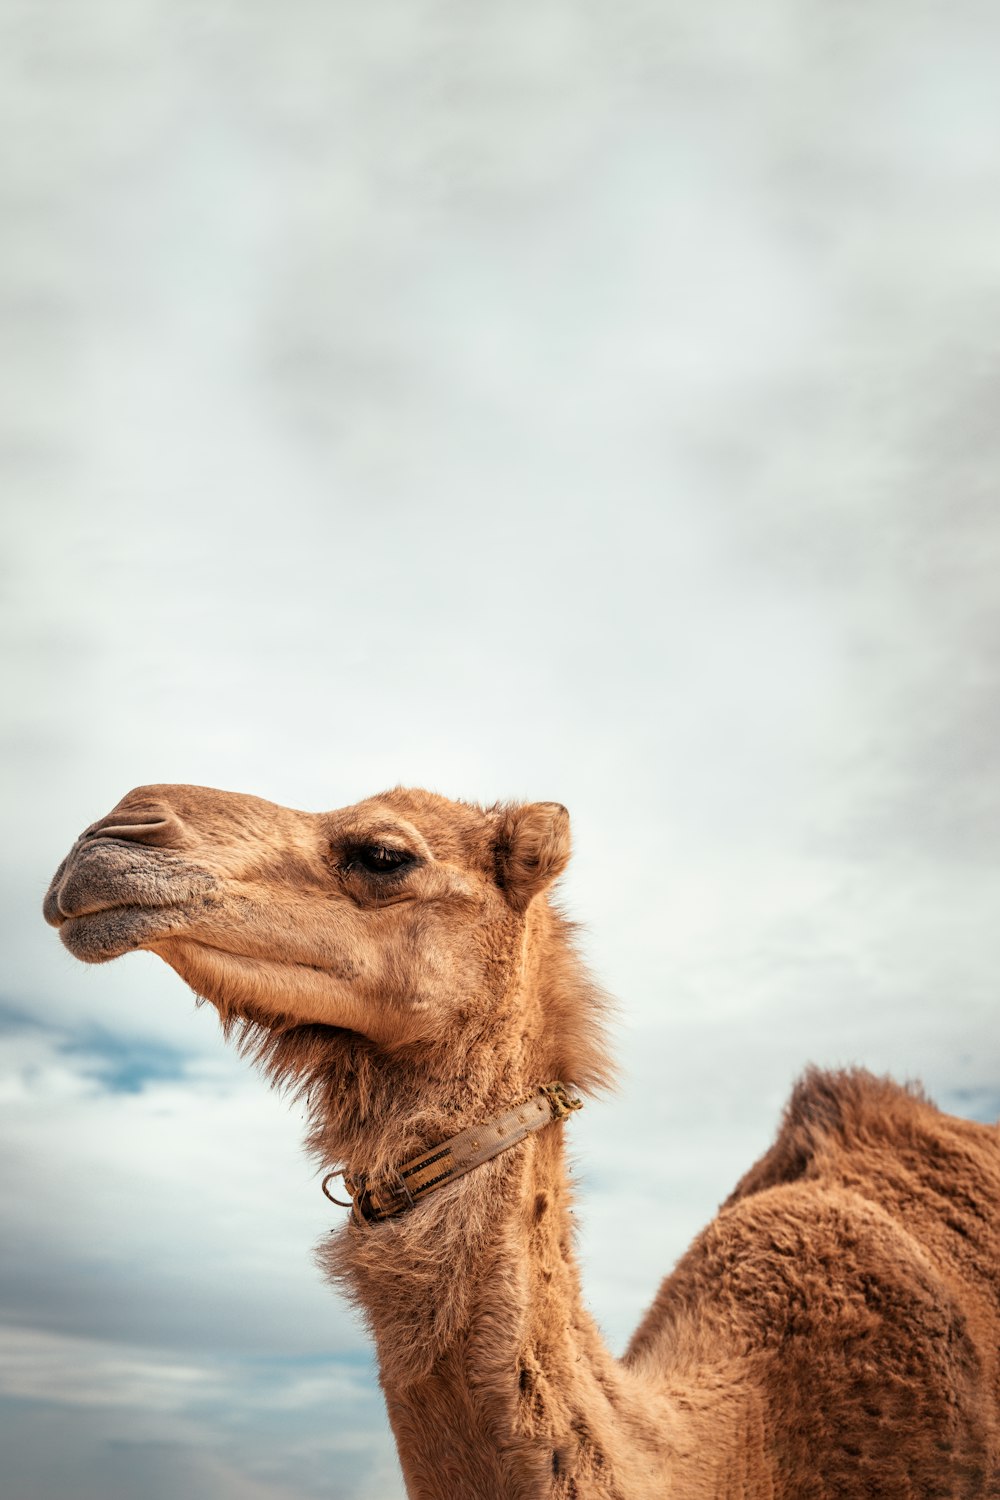 brown camel under white clouds during daytime